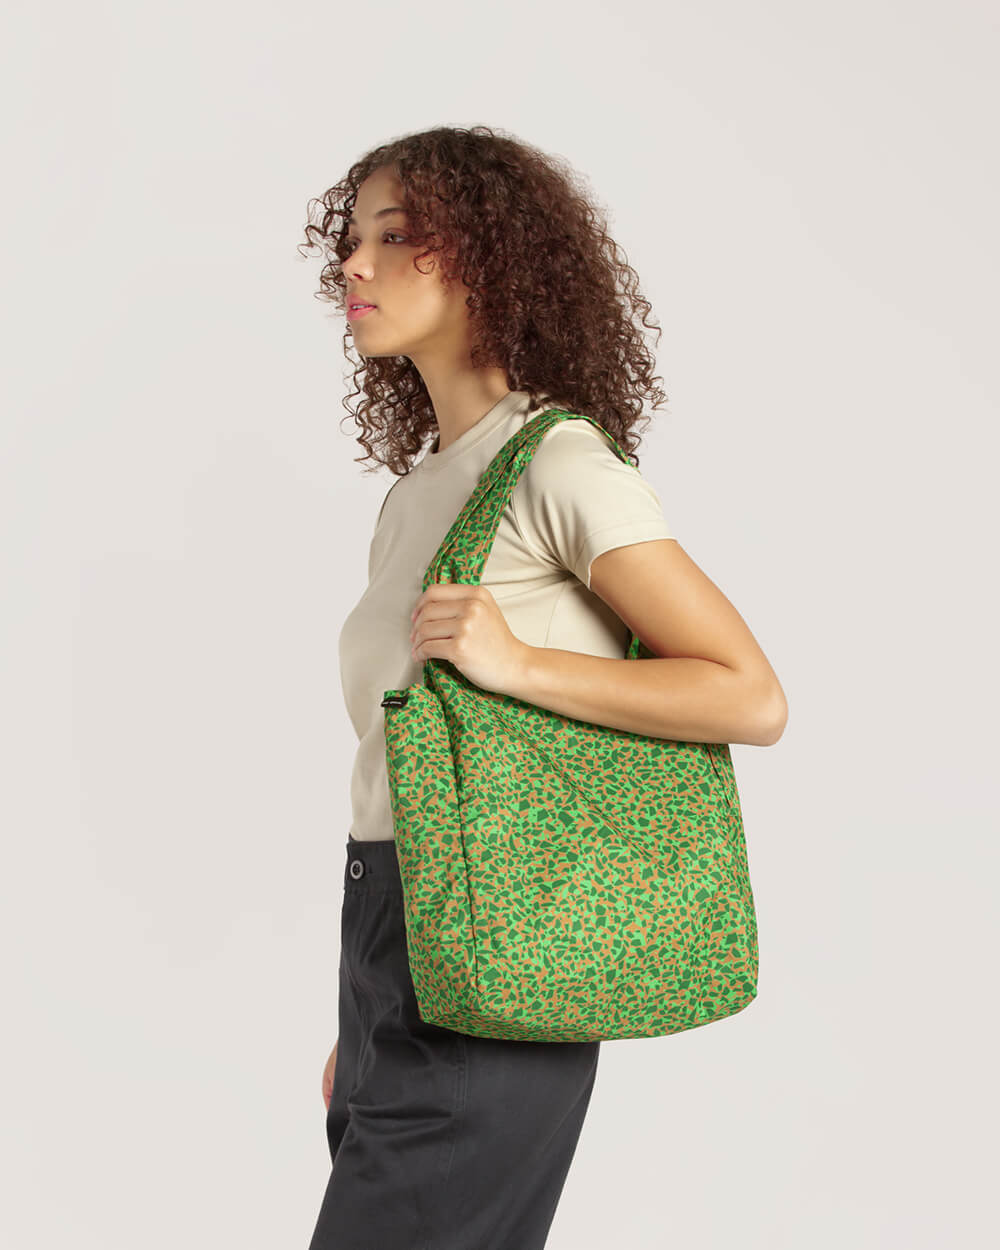 Packable Tote - Responsibly Made, Reusable Tote Bag